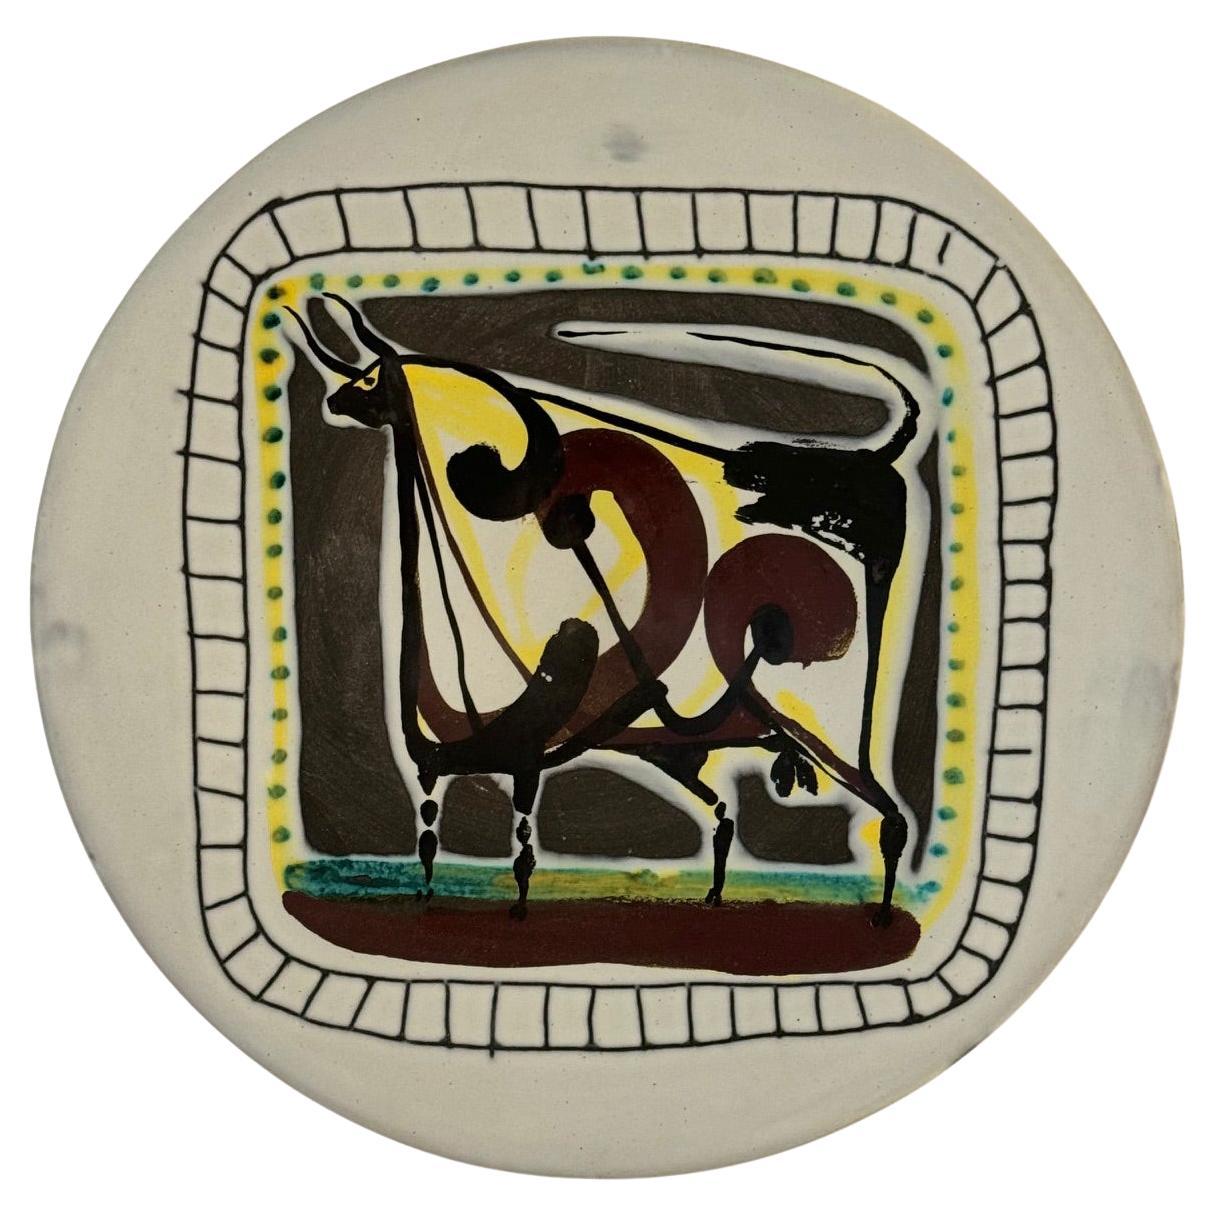 Ceramic Dish "Bull" Signed by Roger Capron, Vallauris 1955